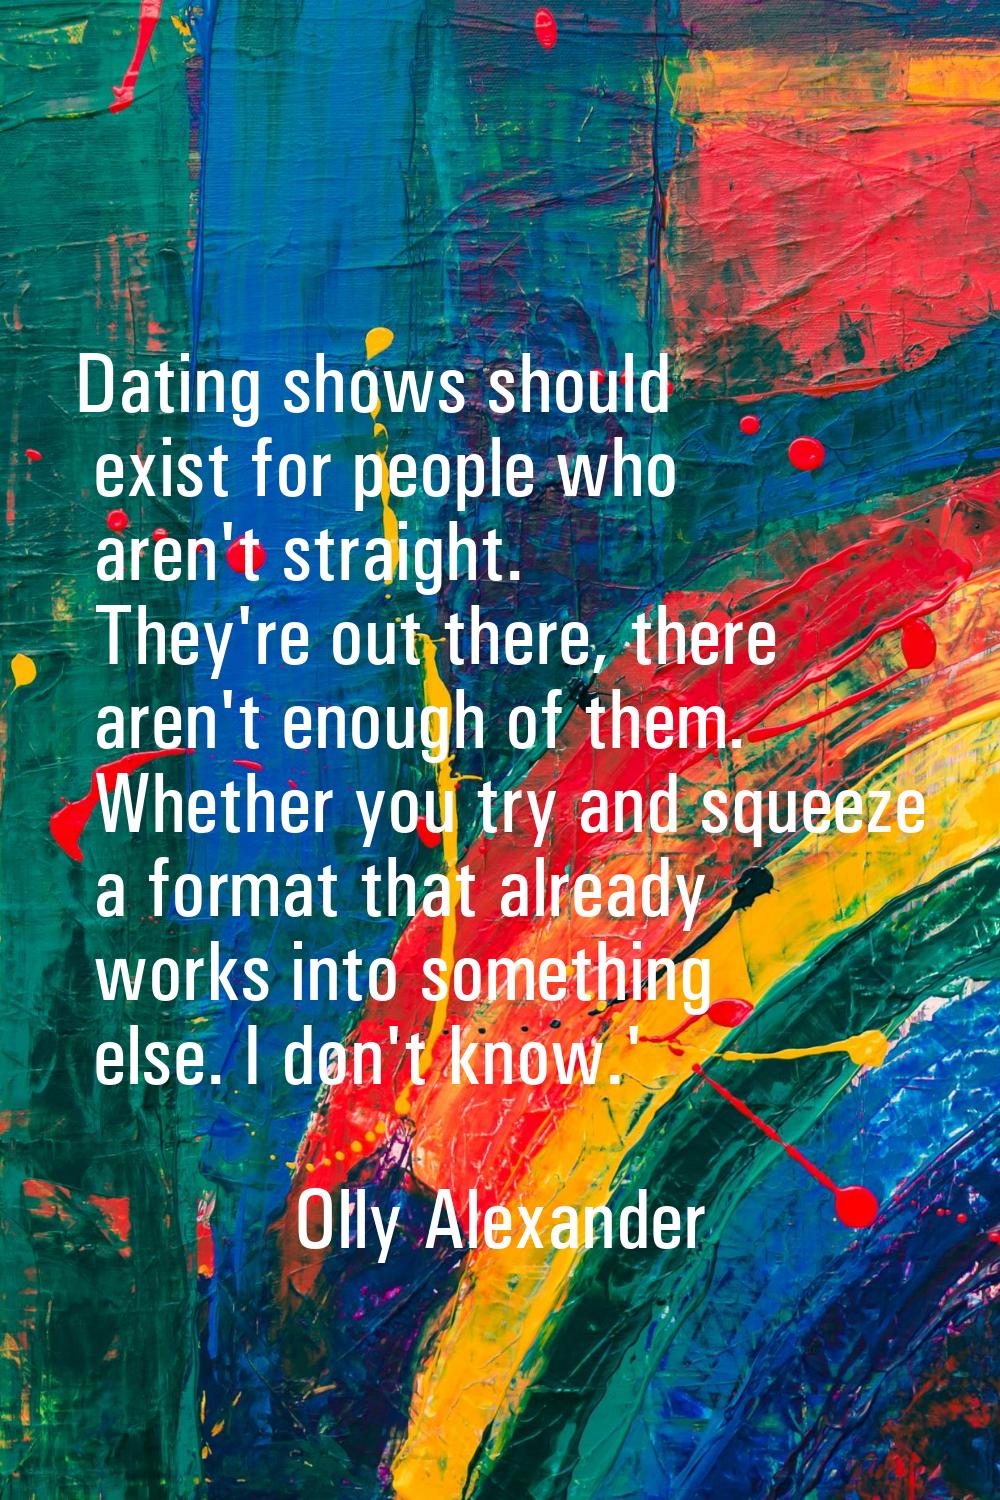 Dating shows should exist for people who aren't straight. They're out there, there aren't enough of